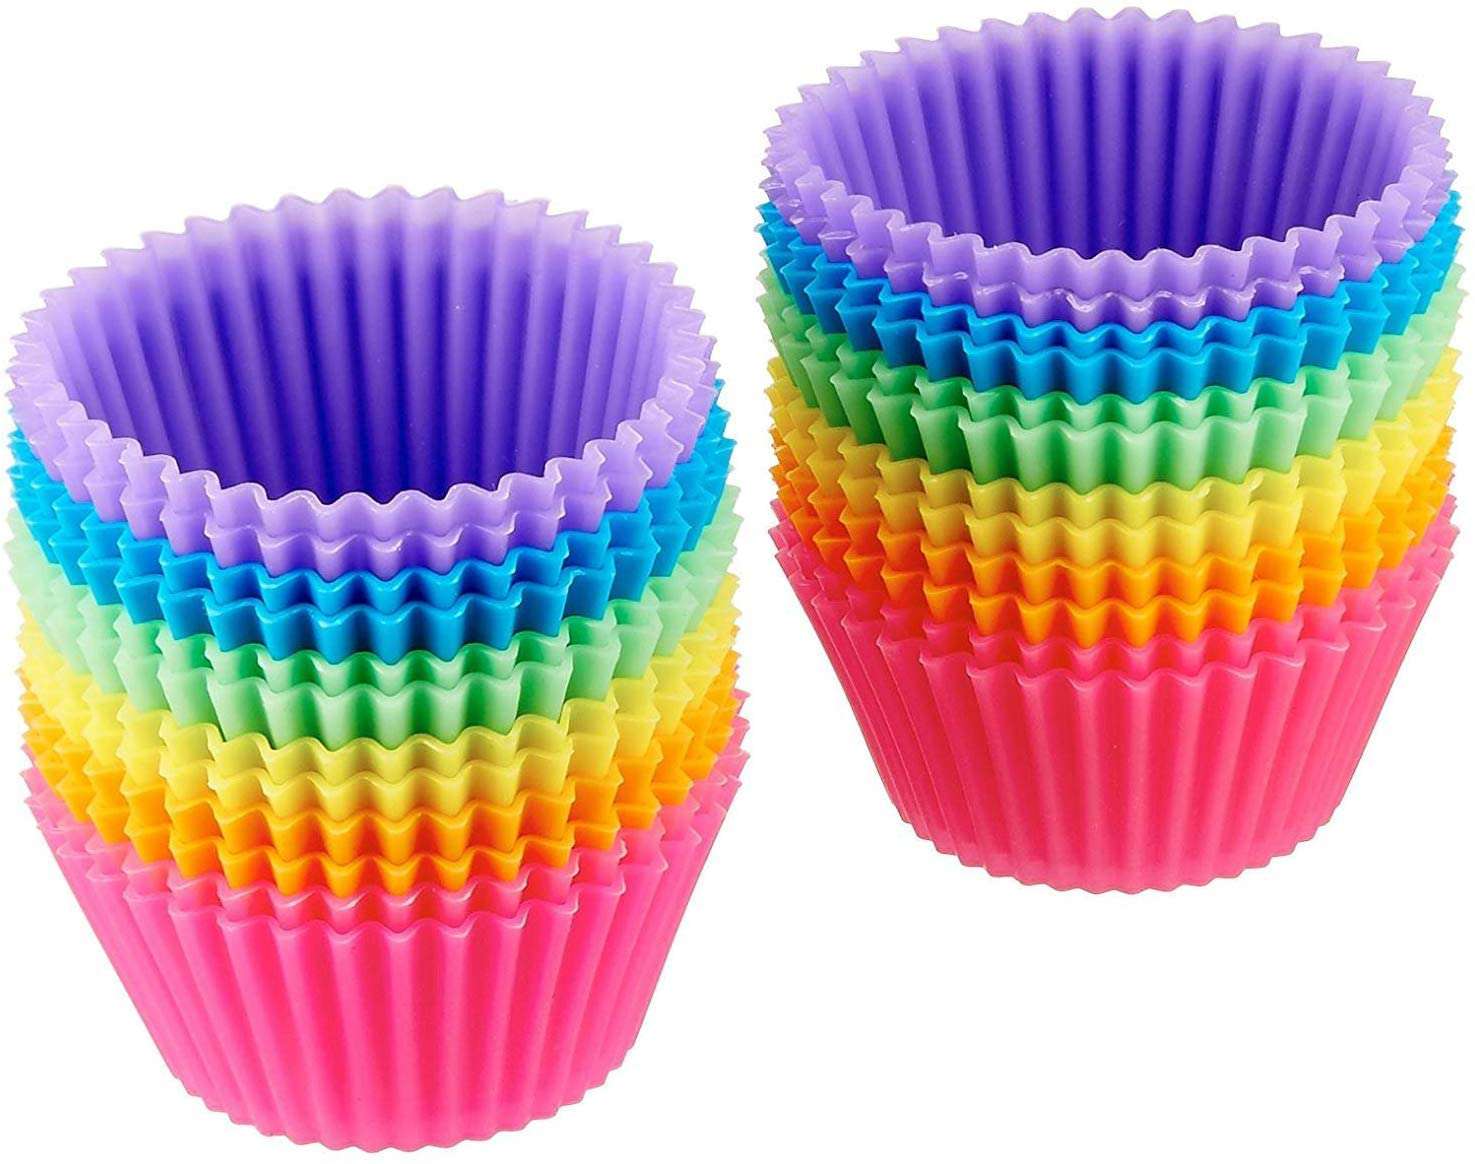 Silicone Cupcake Liners Reusable Baking Cups With Icing Piping Tips & Pastry Bag Heart 4 Shapes 24 Pieces Stars Round Flowers Nonstick & Easy Clean Pastry Muffin Molds 